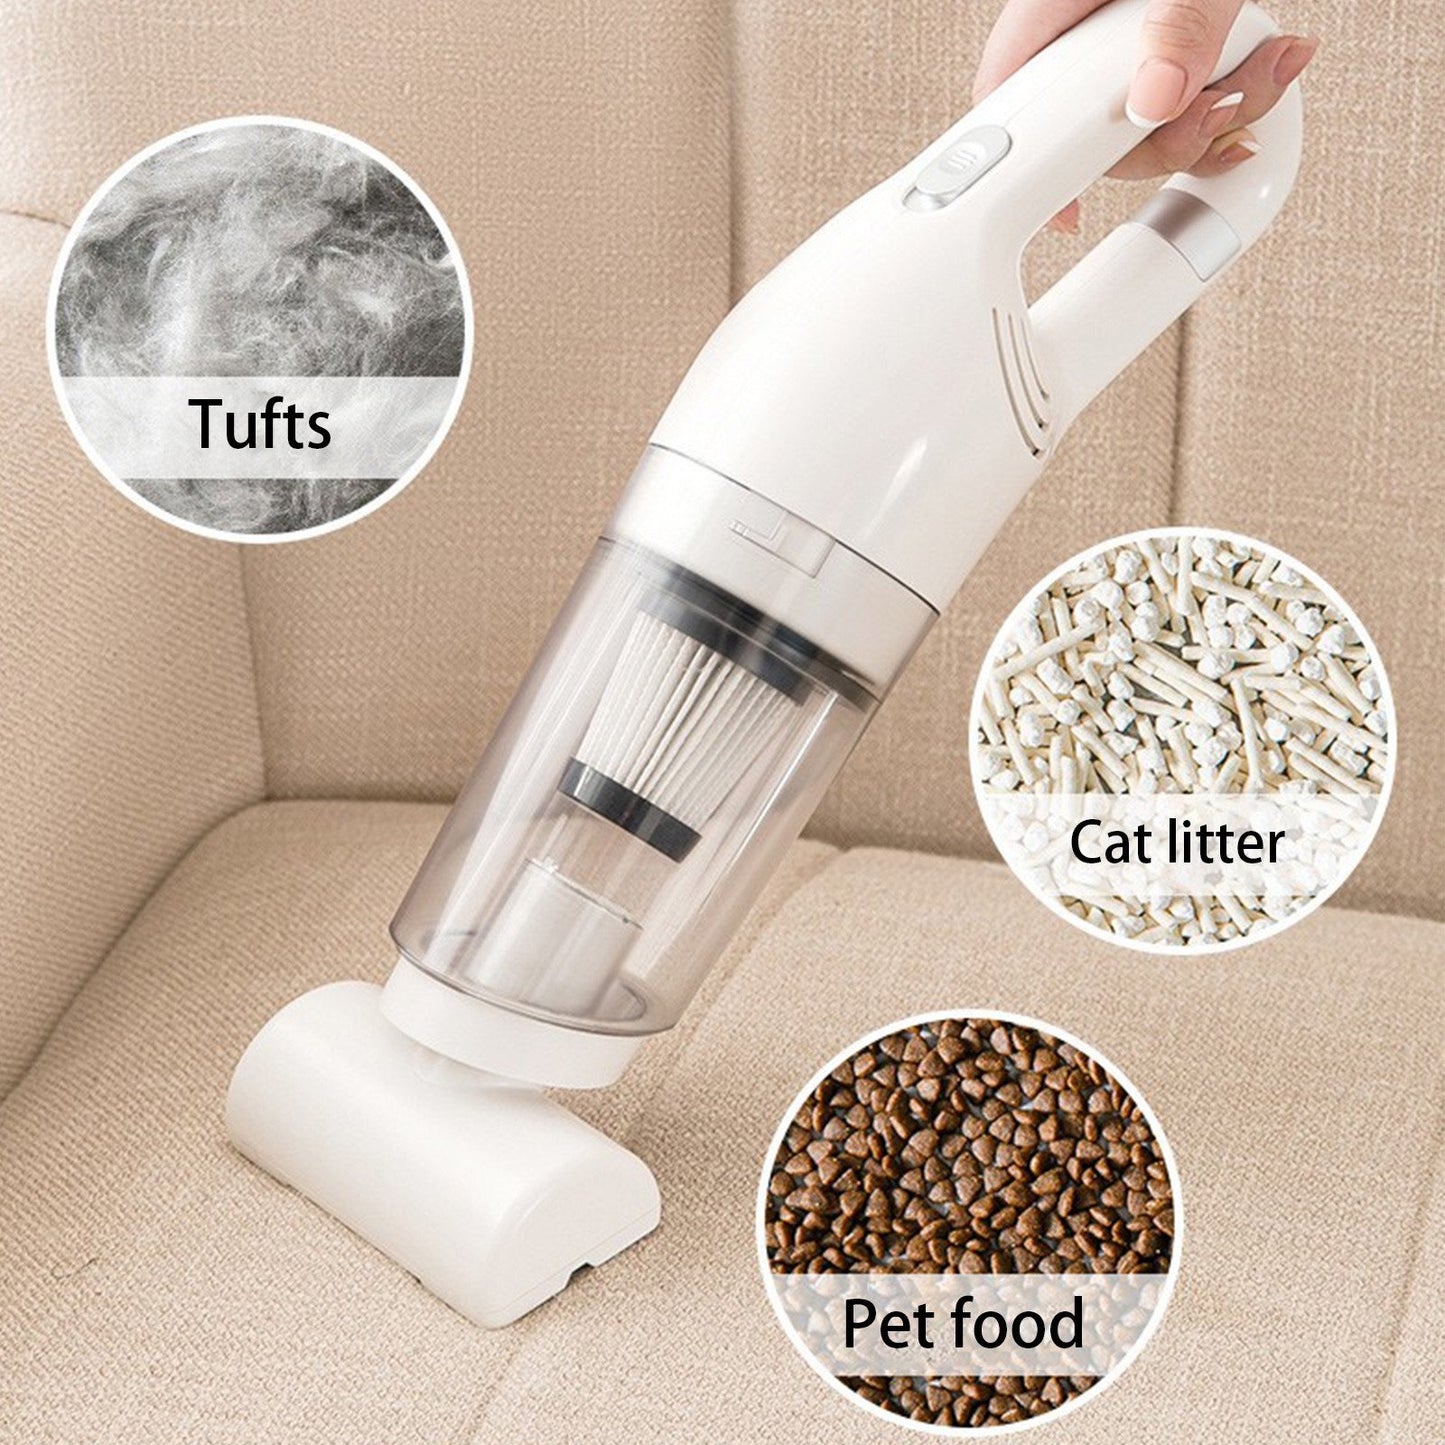 Handheld Cordless Vacuum Cleaner for easy cleaning3